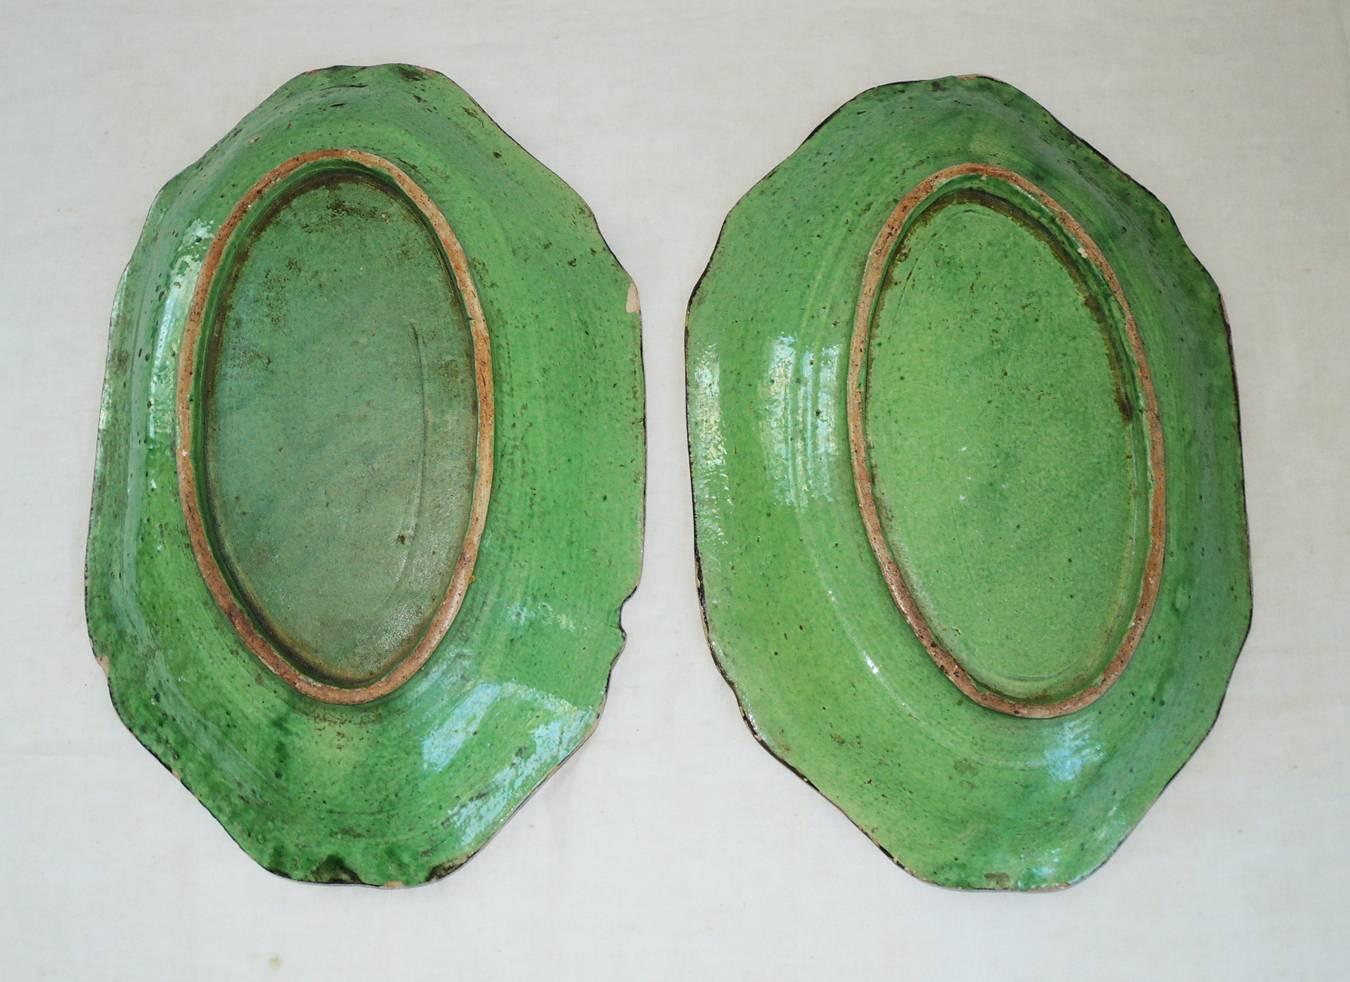 A pair of green glazed serving dishes from Dieu-le-fit, France, 19th century.